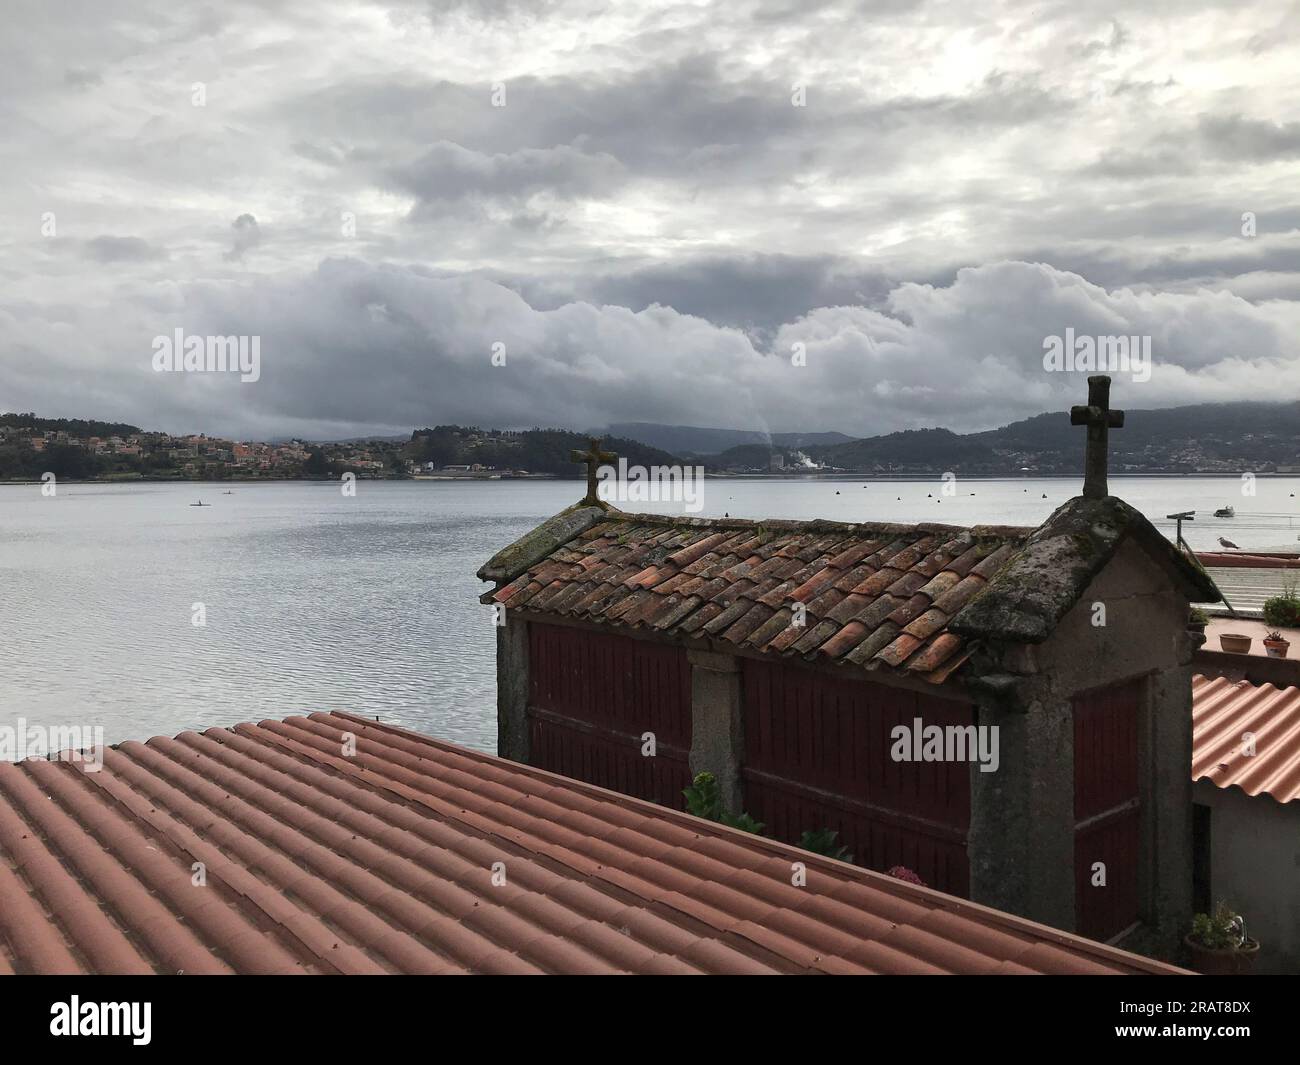 View of an old building used to store cereals and lined with wood with the Galician coast in the background. Stock Photo